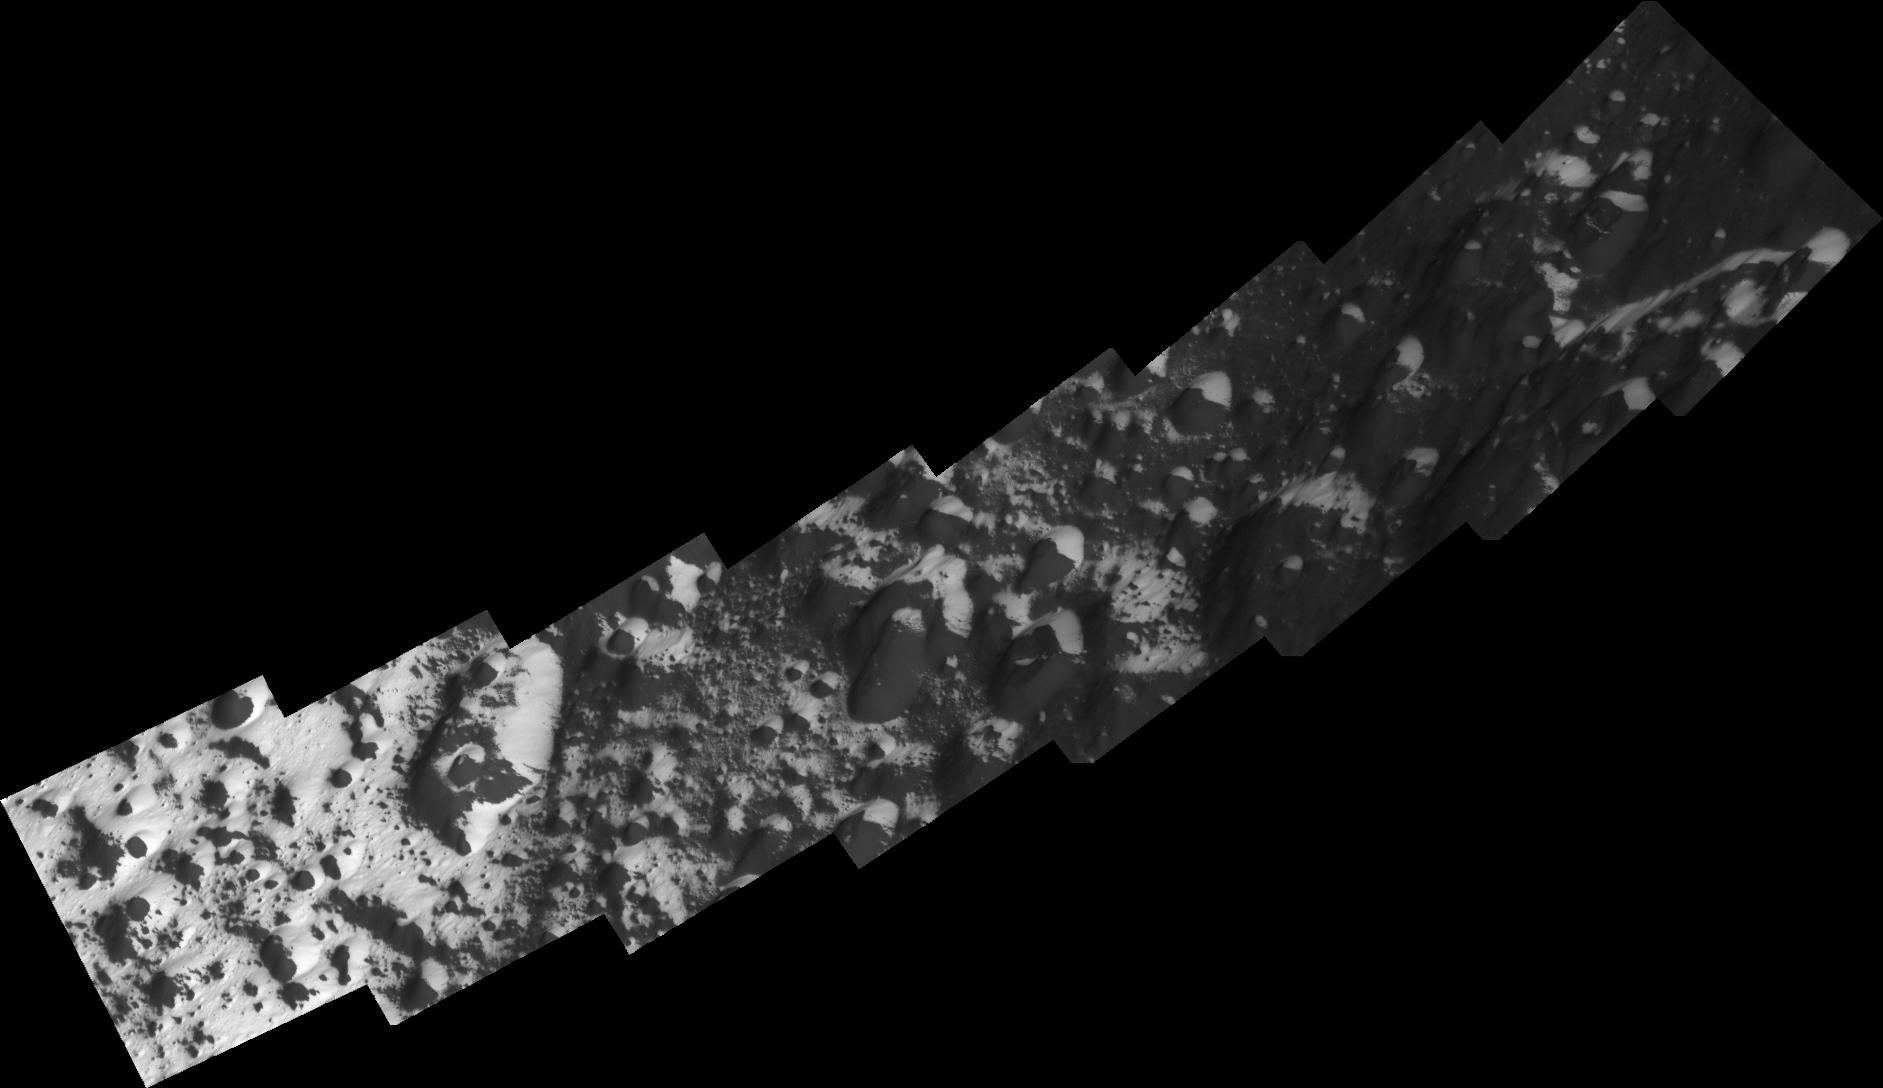 High-resolution images of the transition region from dark to bright terrain on Iapetus